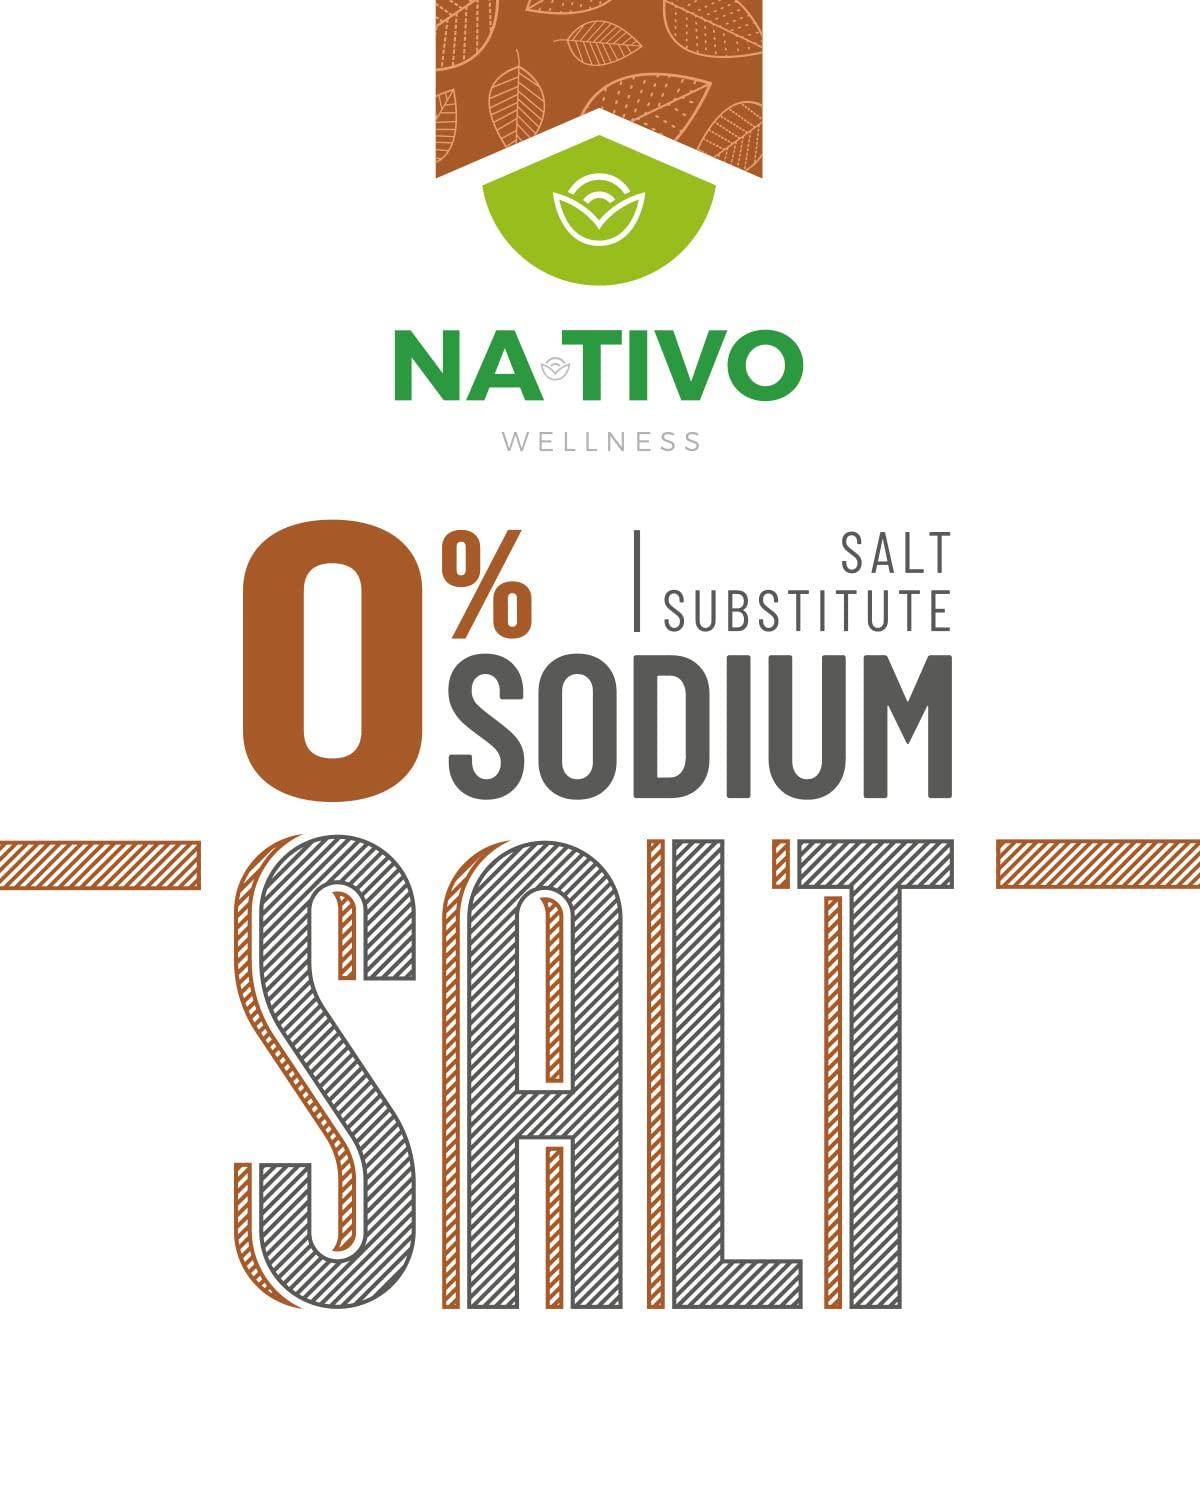 Nativo Salt Substitute 0% Sodium - Salt alternative for people who cannot  take salt - Keto and Paleo friendly - Pack 4 shakers x 3 oz